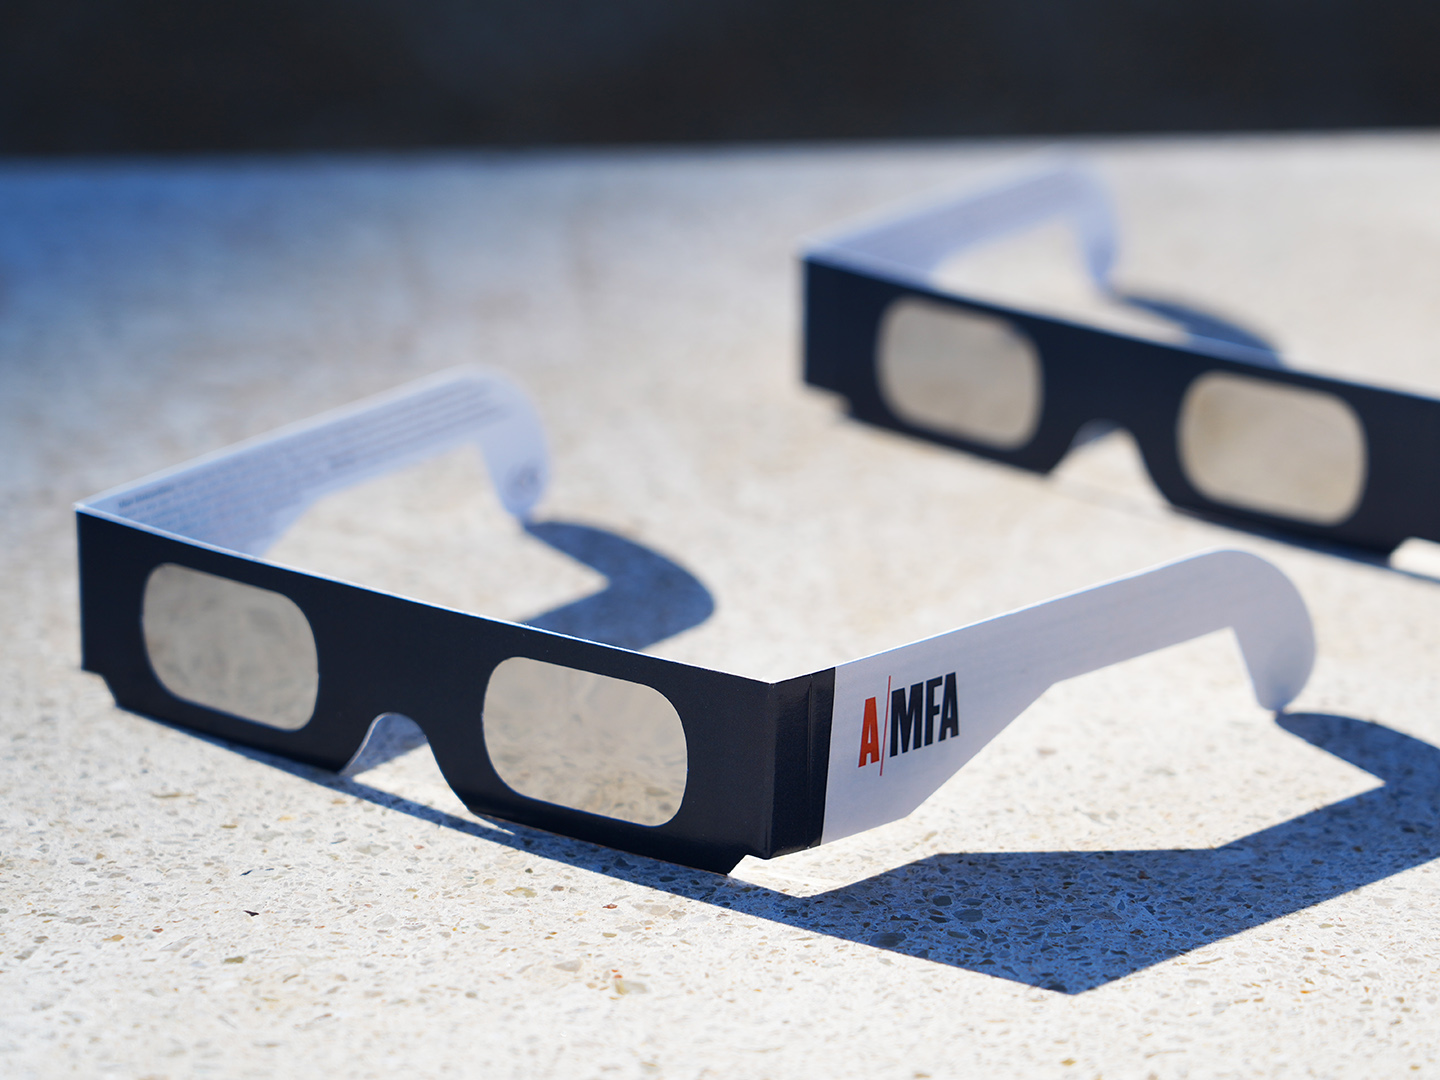 Photo of AMFA-branded eclipse glasses on a stone surface.